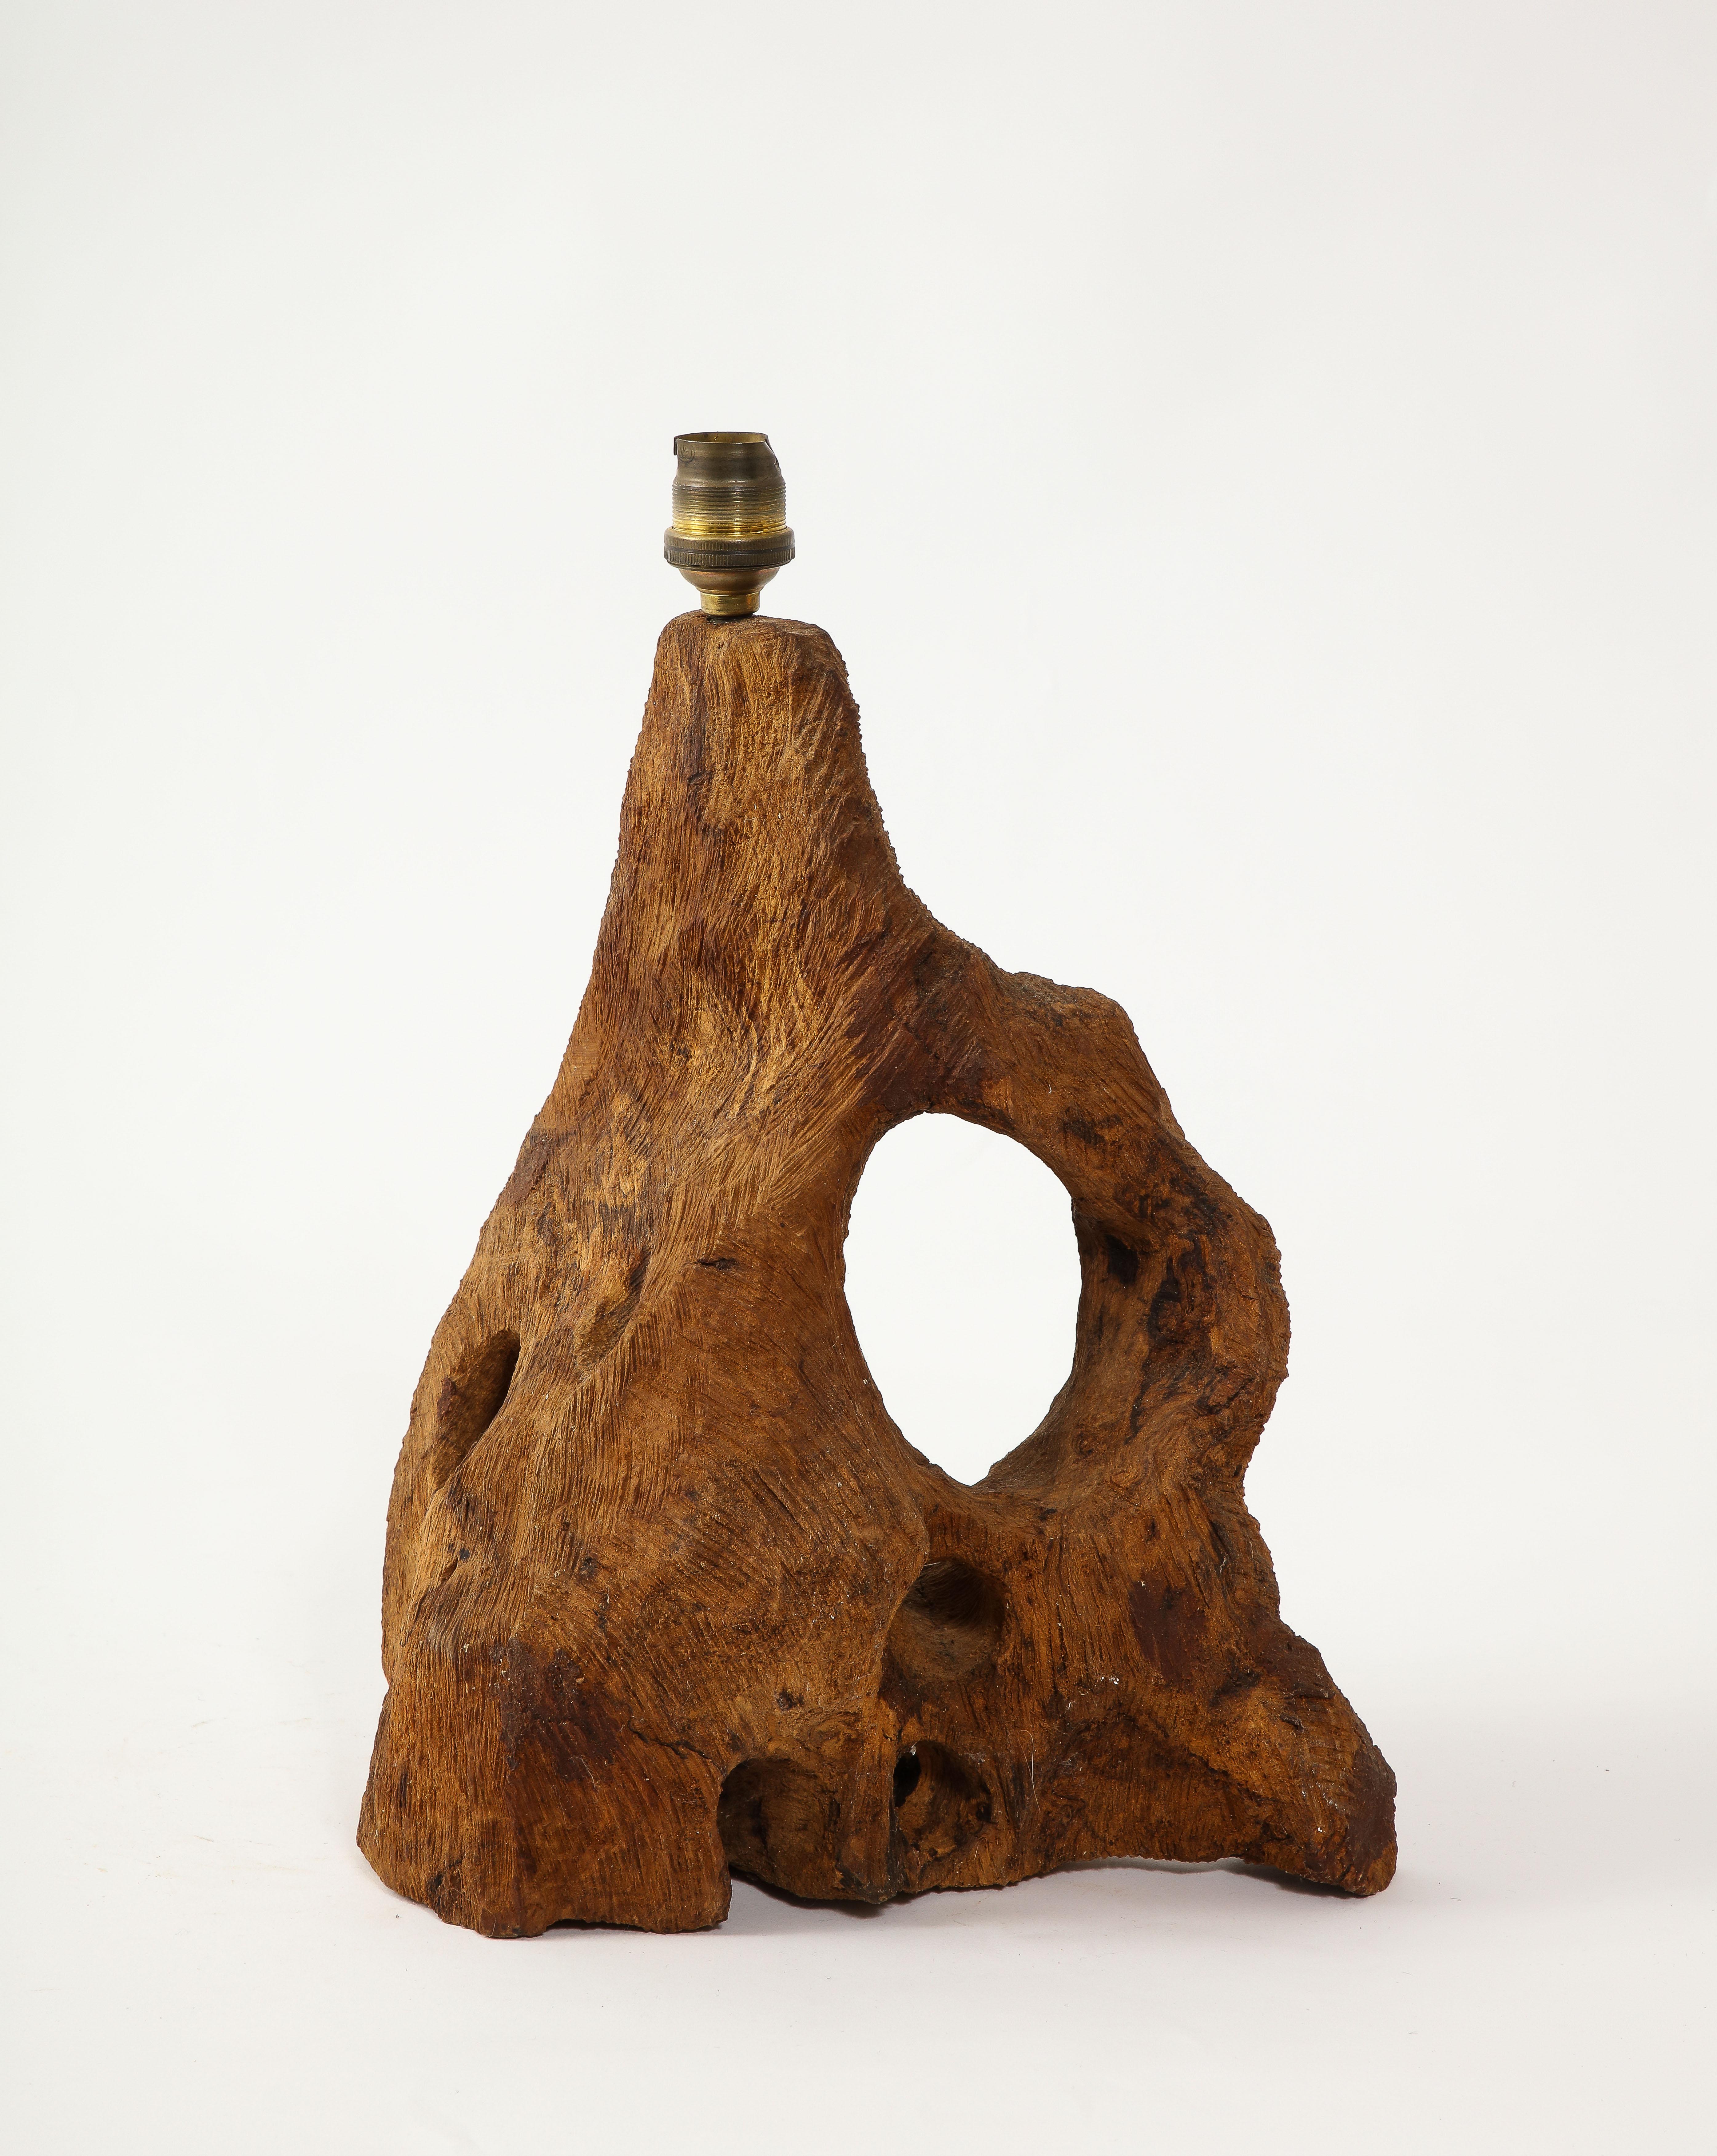 Rough Carved Olive wood table lamp, the tool marks follow the natural shapes of the material.

13x10x8 Base Only